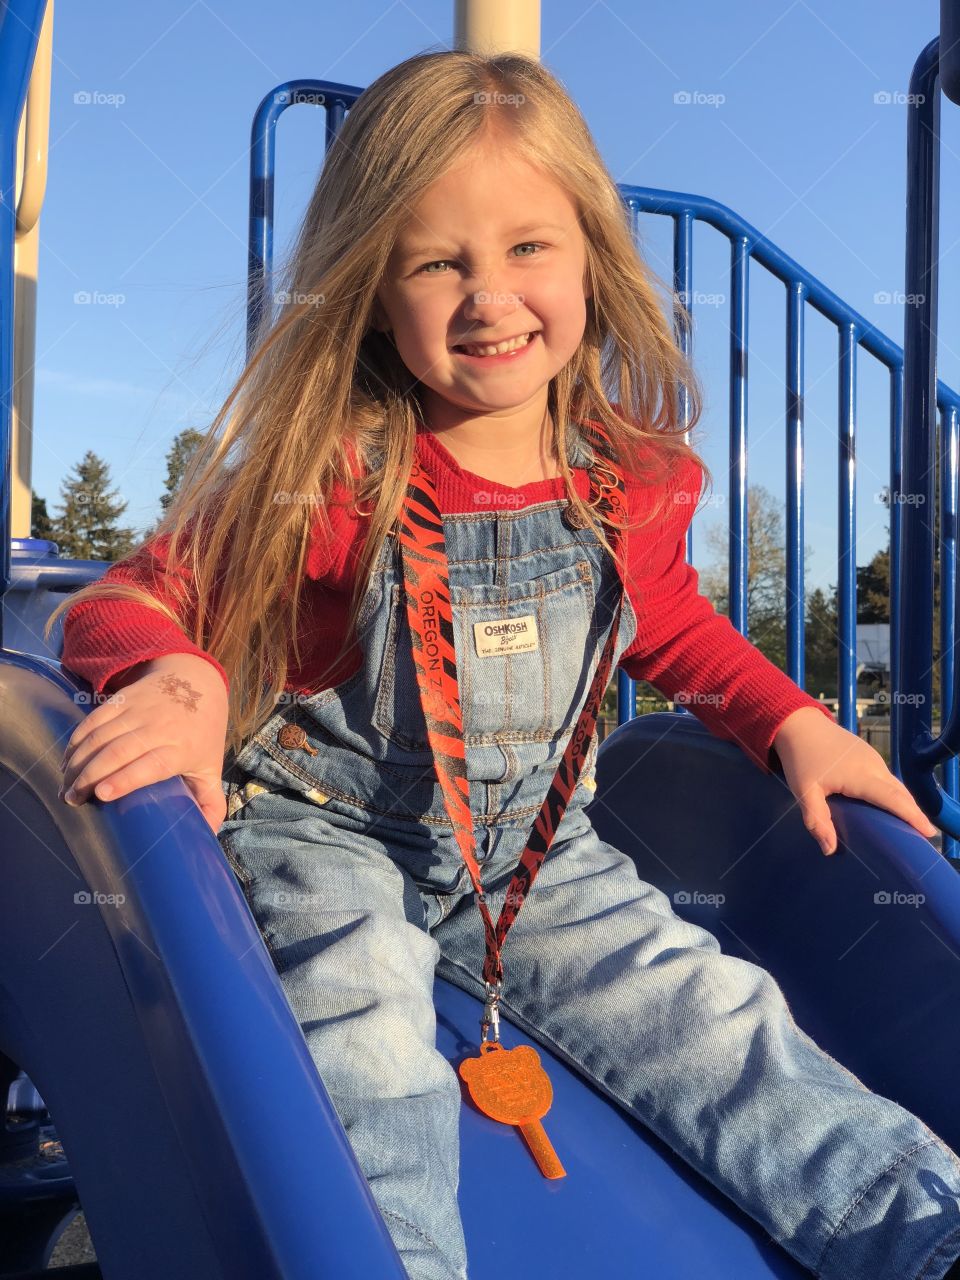 Little girl with blue eyes and long blond hair wearing overalls going down a blue slide at the playground